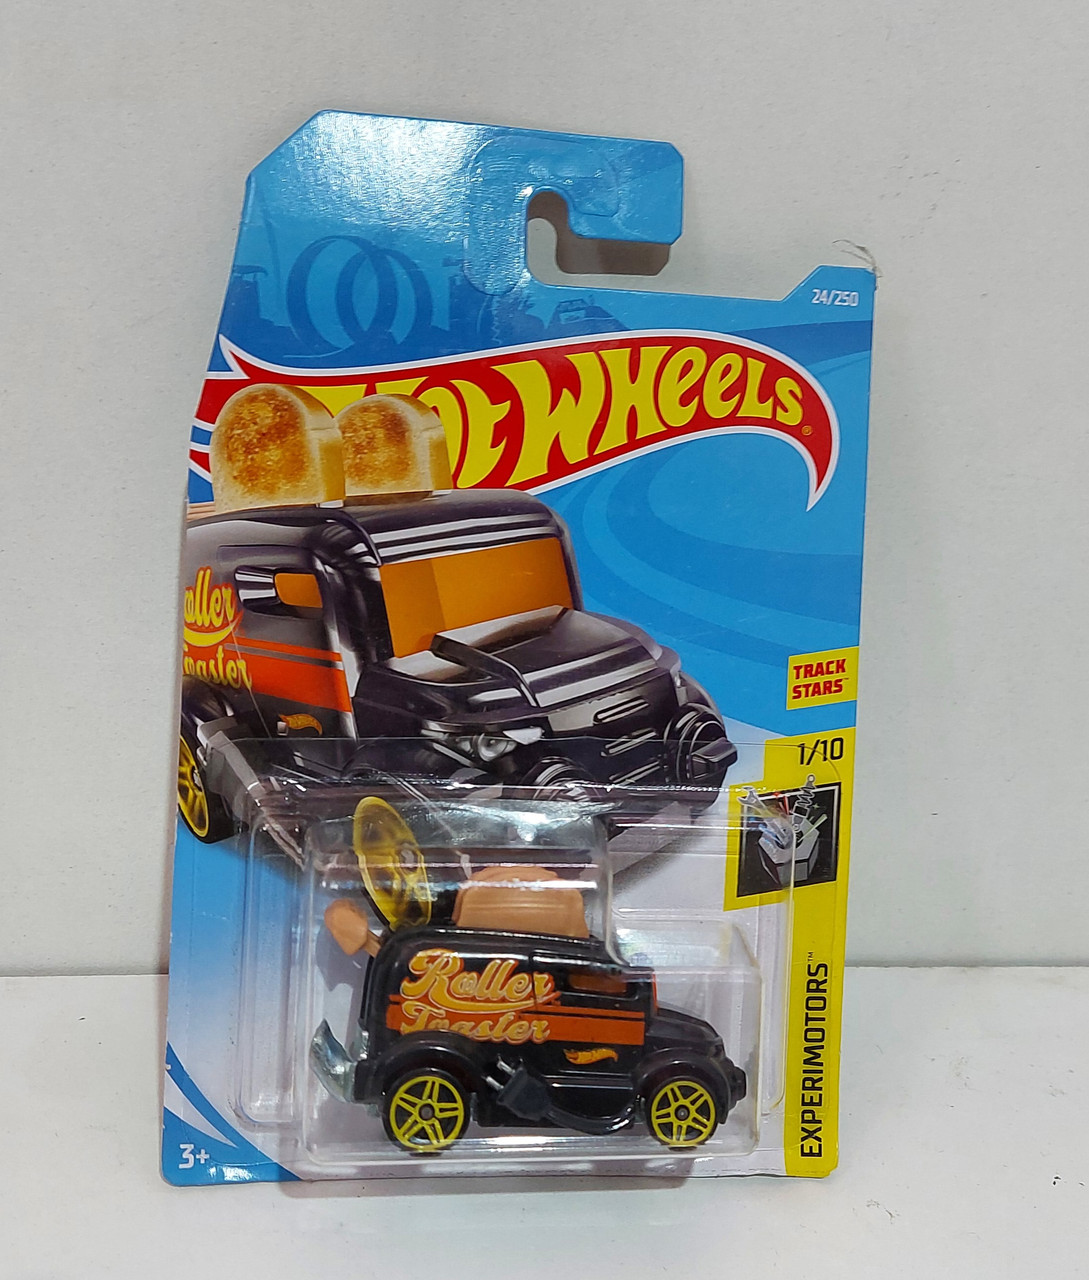 Машинка Hot wheels Roller Faster Хотвилс